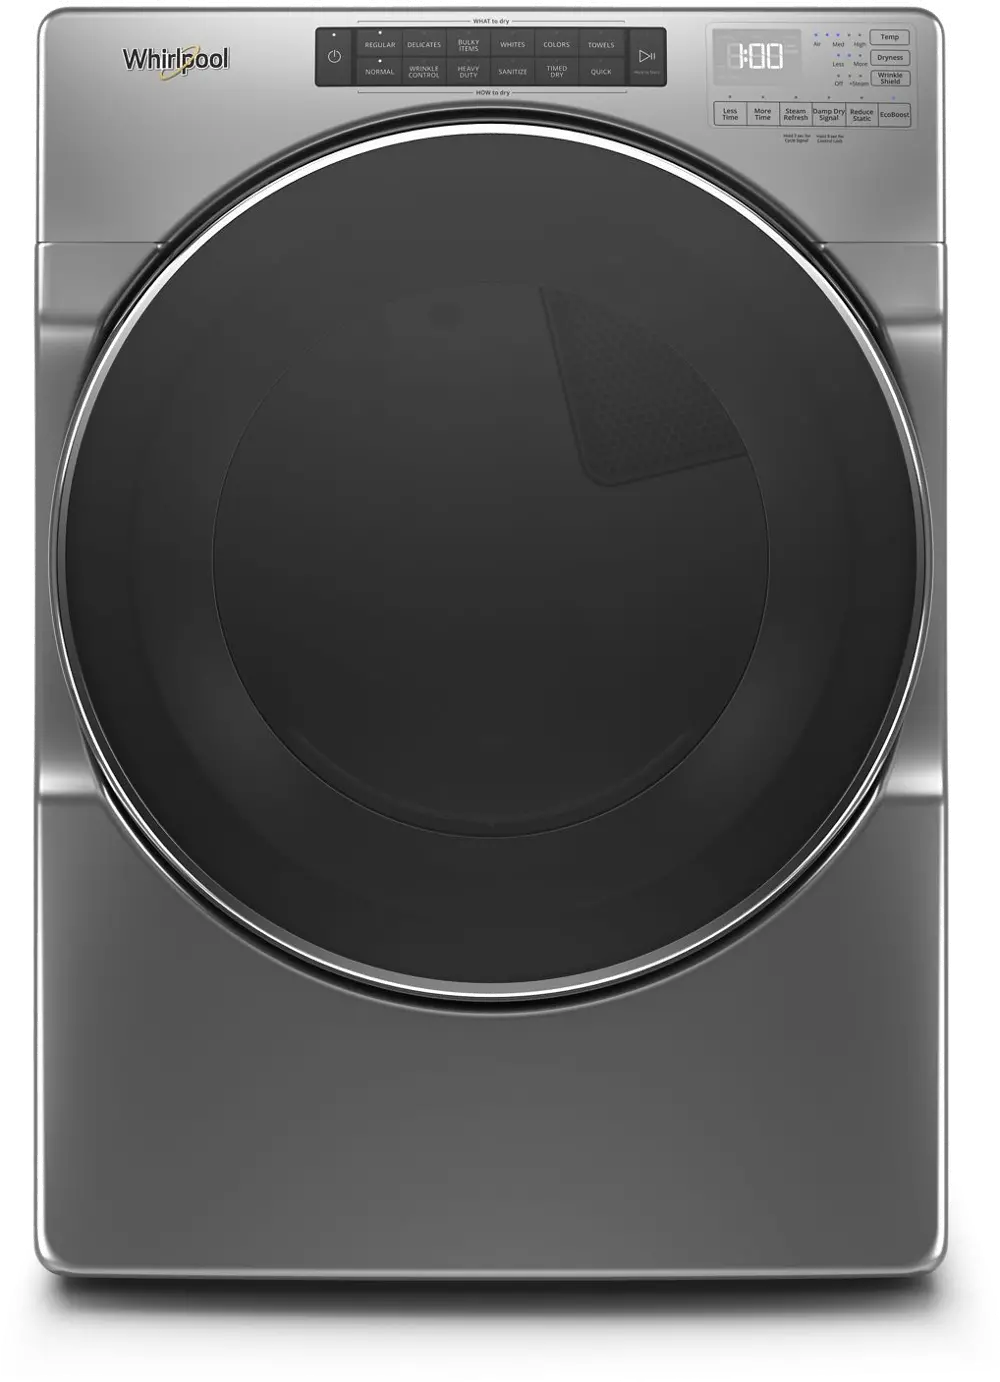 WED6620HC Whirlpool 7.4 cu. ft. Electric Dryer with Steam Cycles - Chrome-1